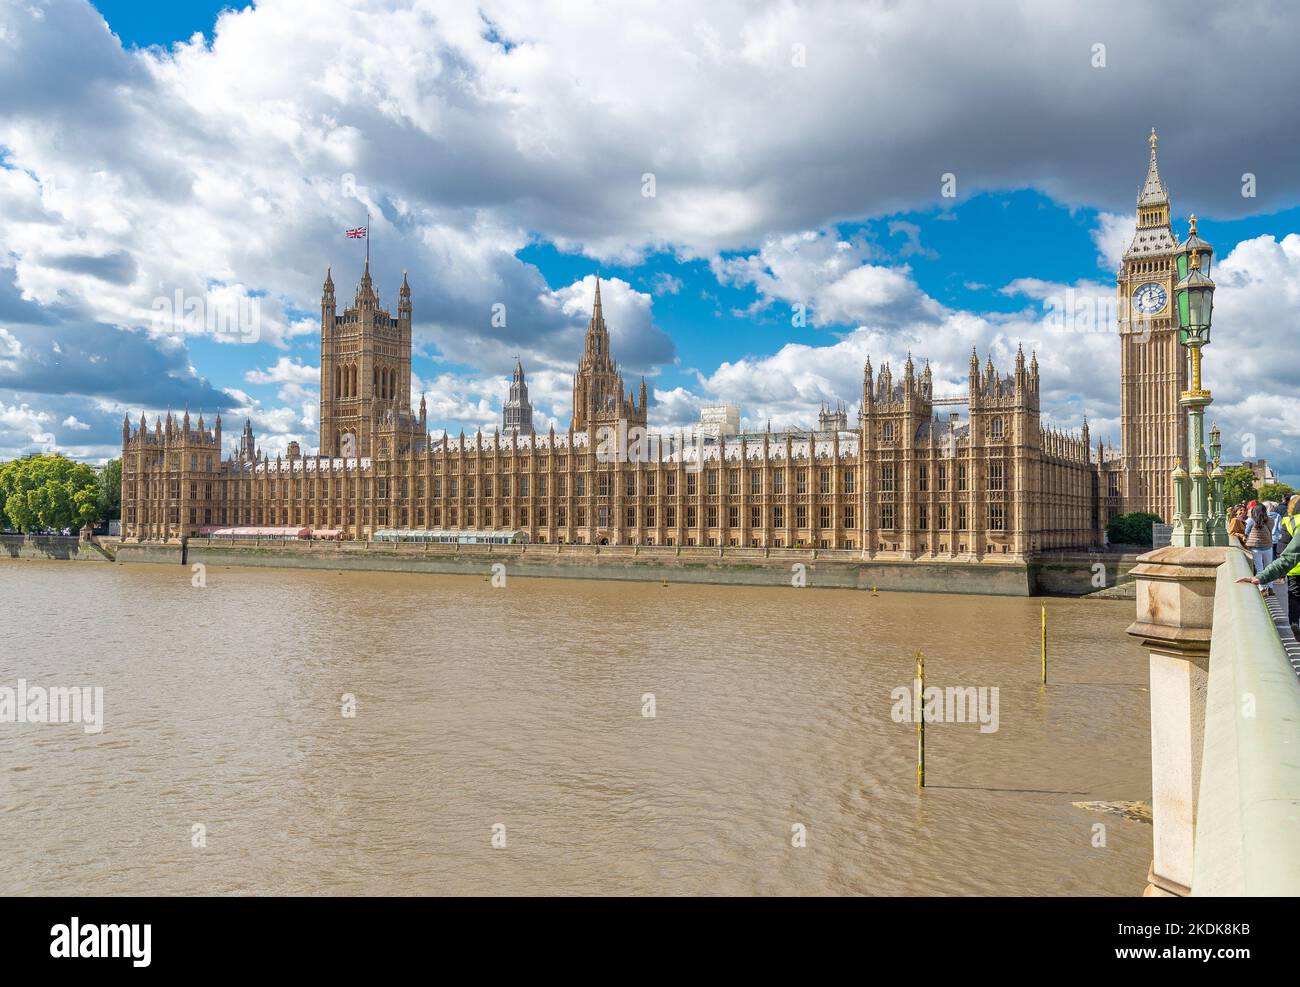 The Palace of Westminster, Houses of Parliament, on the north bank of the River Thames in the City of Westminster, central London, England, UK Stock Photo